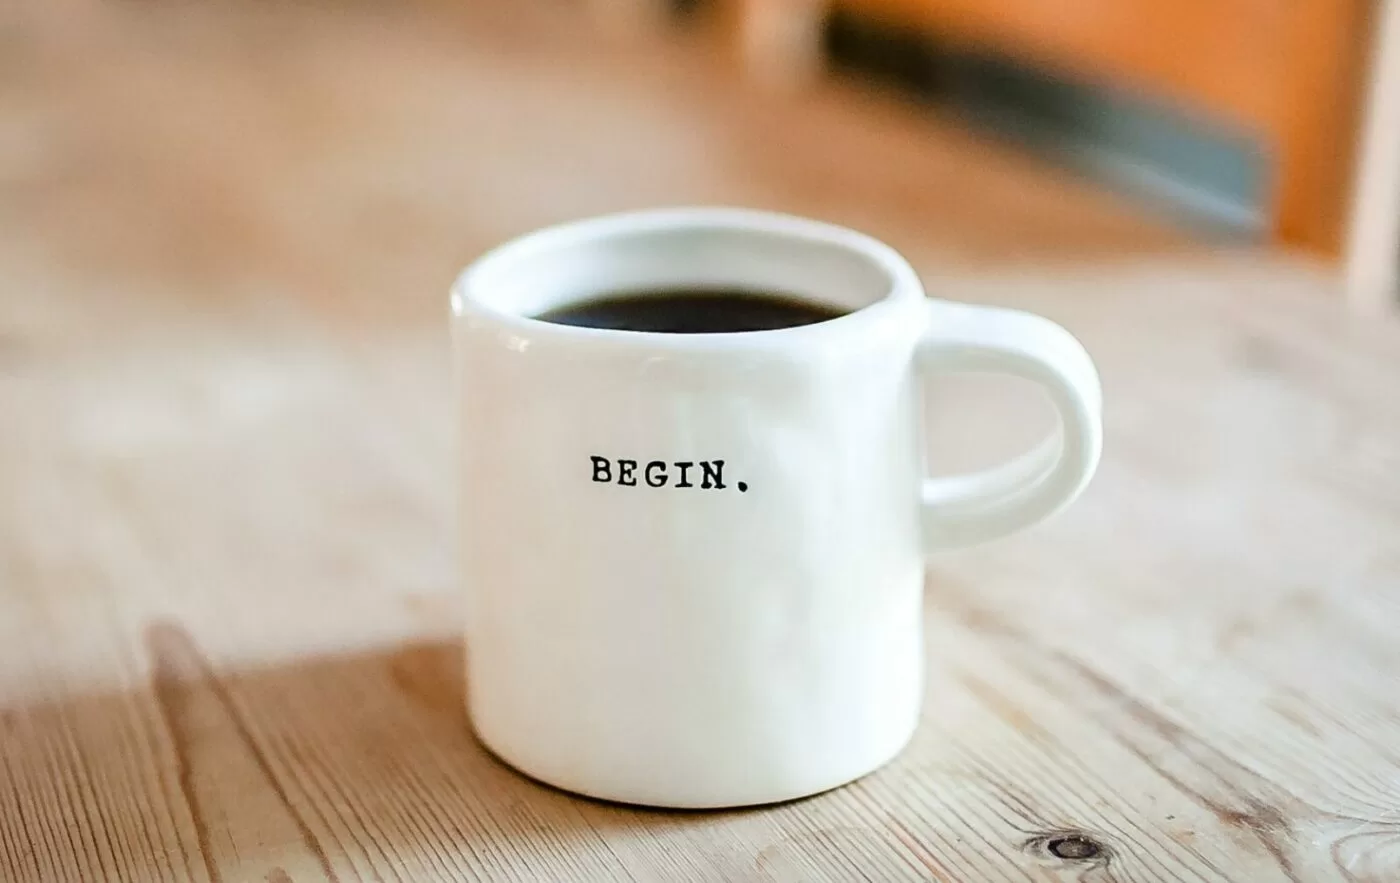 White ceramic mug with the word begin written on it sat on a wooden table